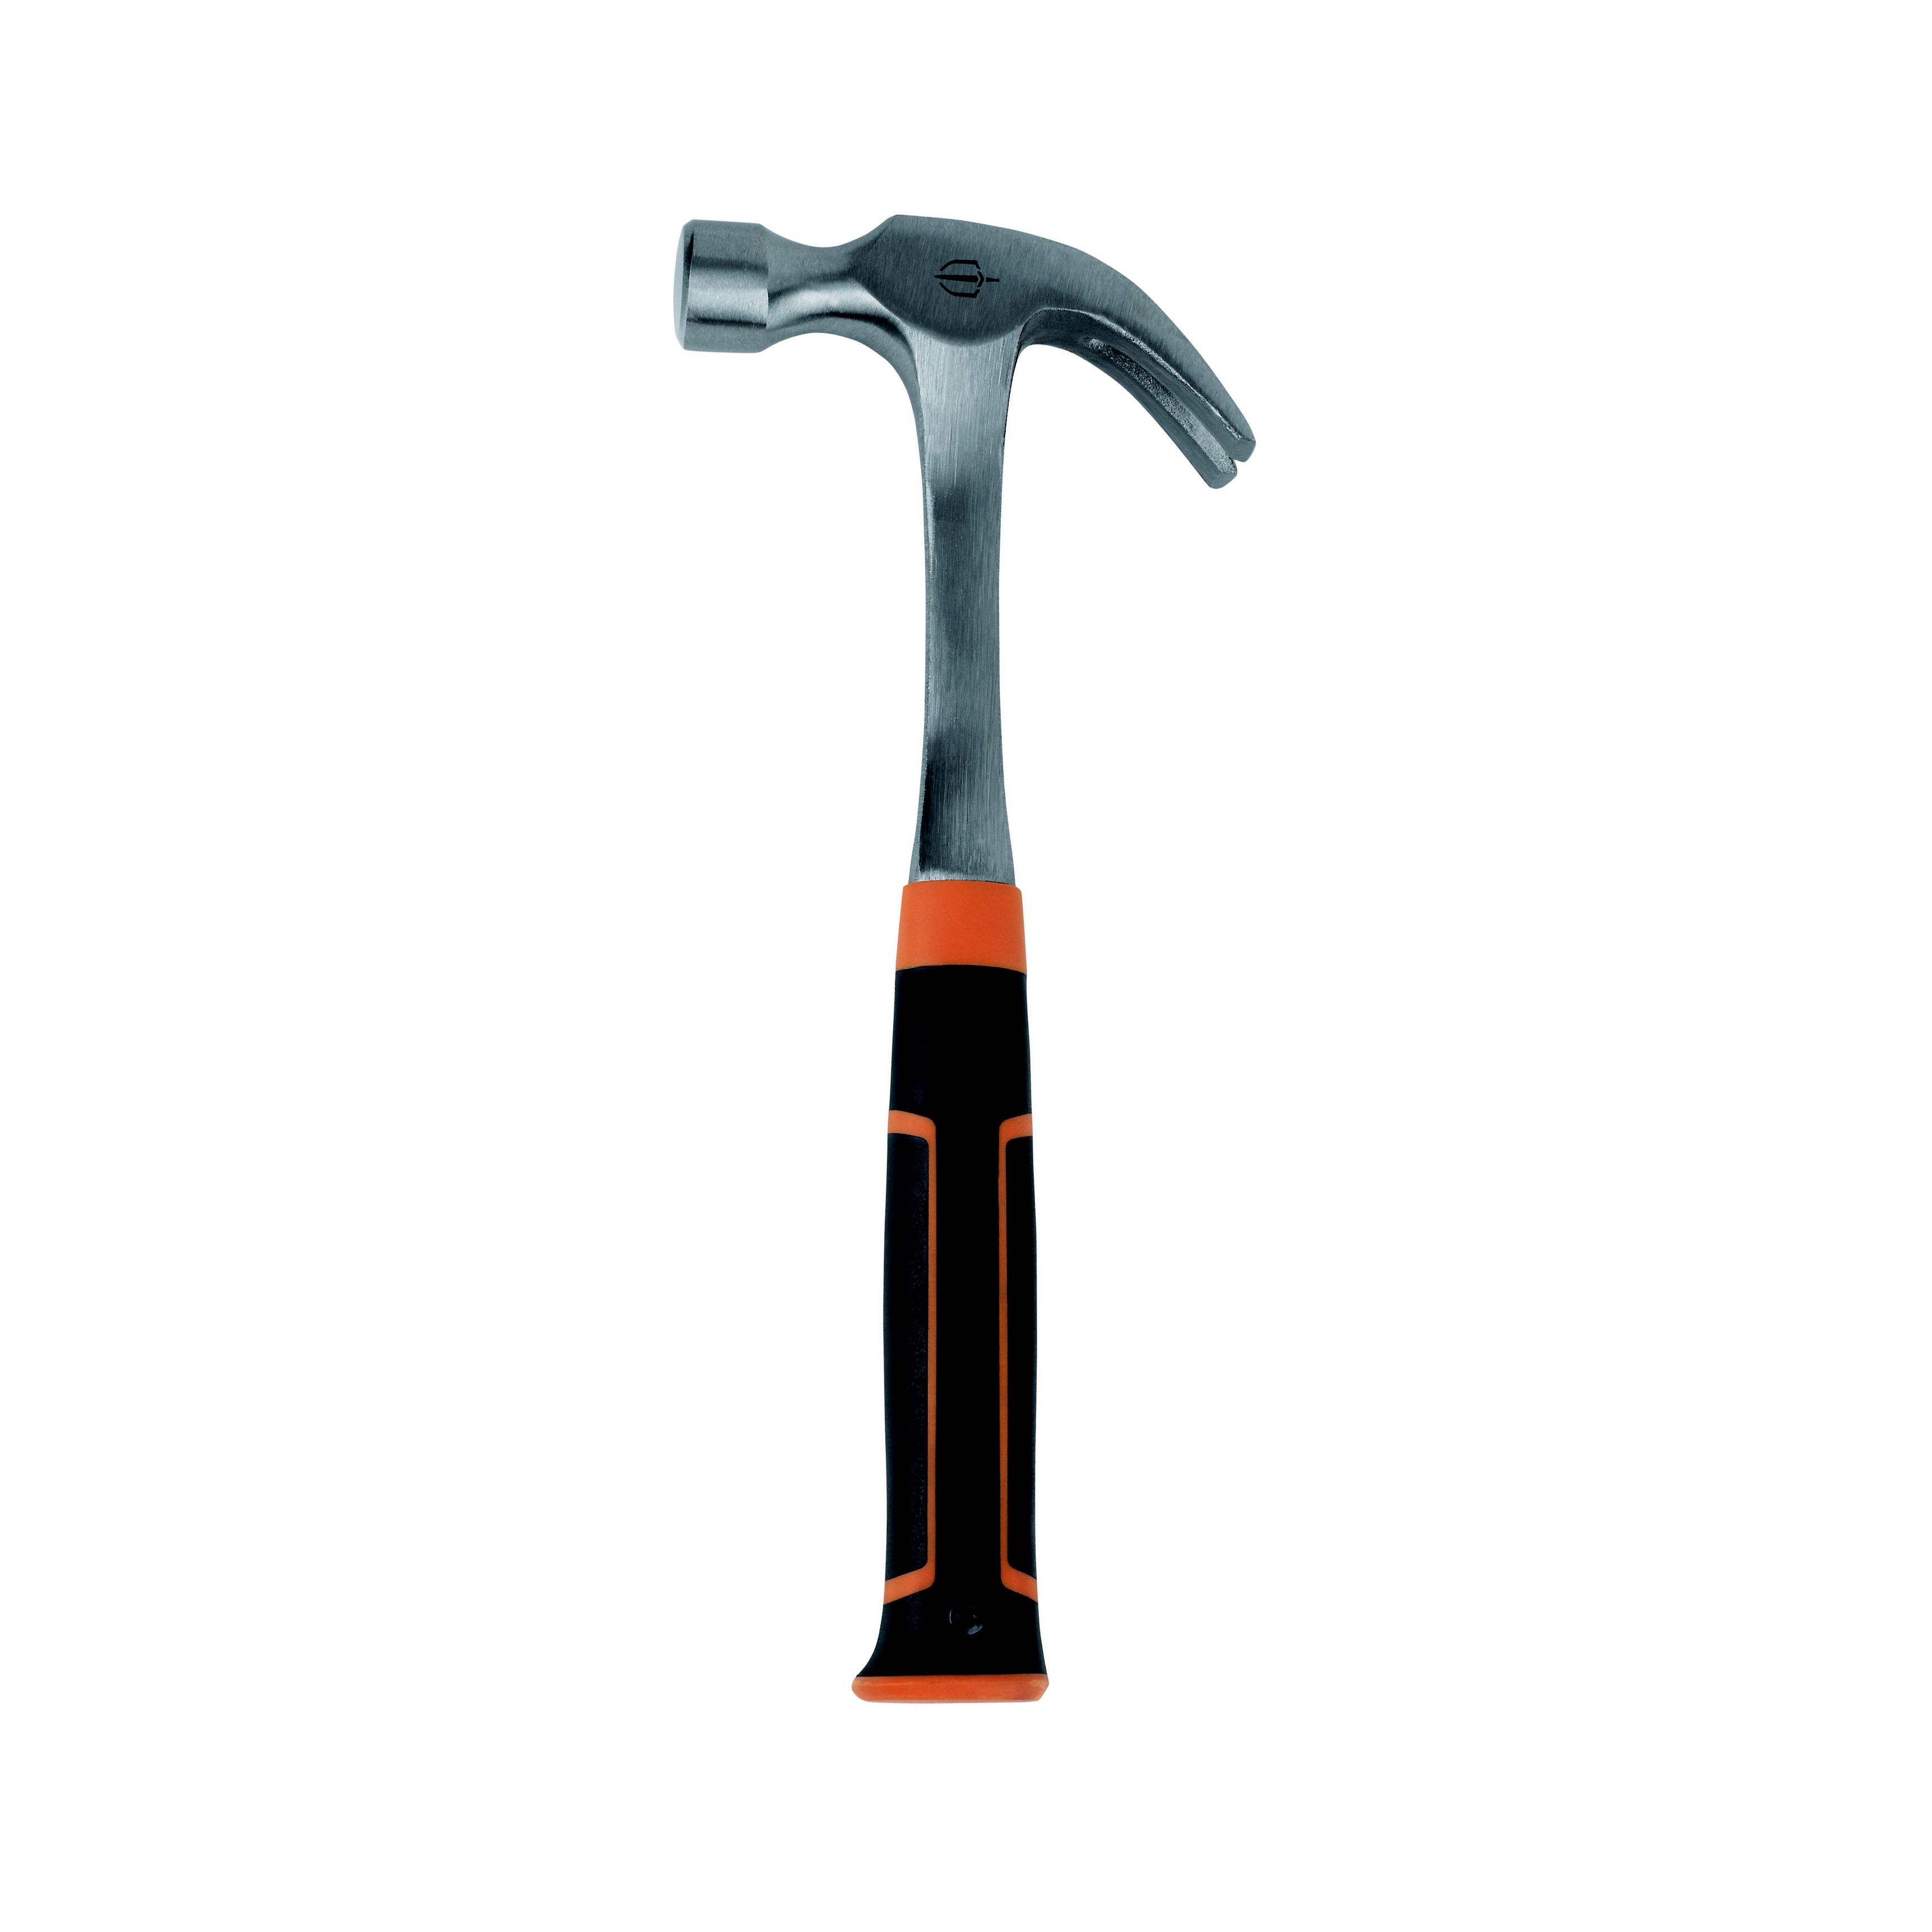 313-PT-20N, SAM High Carbon Tool Steel Claw Hammer with Steel Handle, 730g